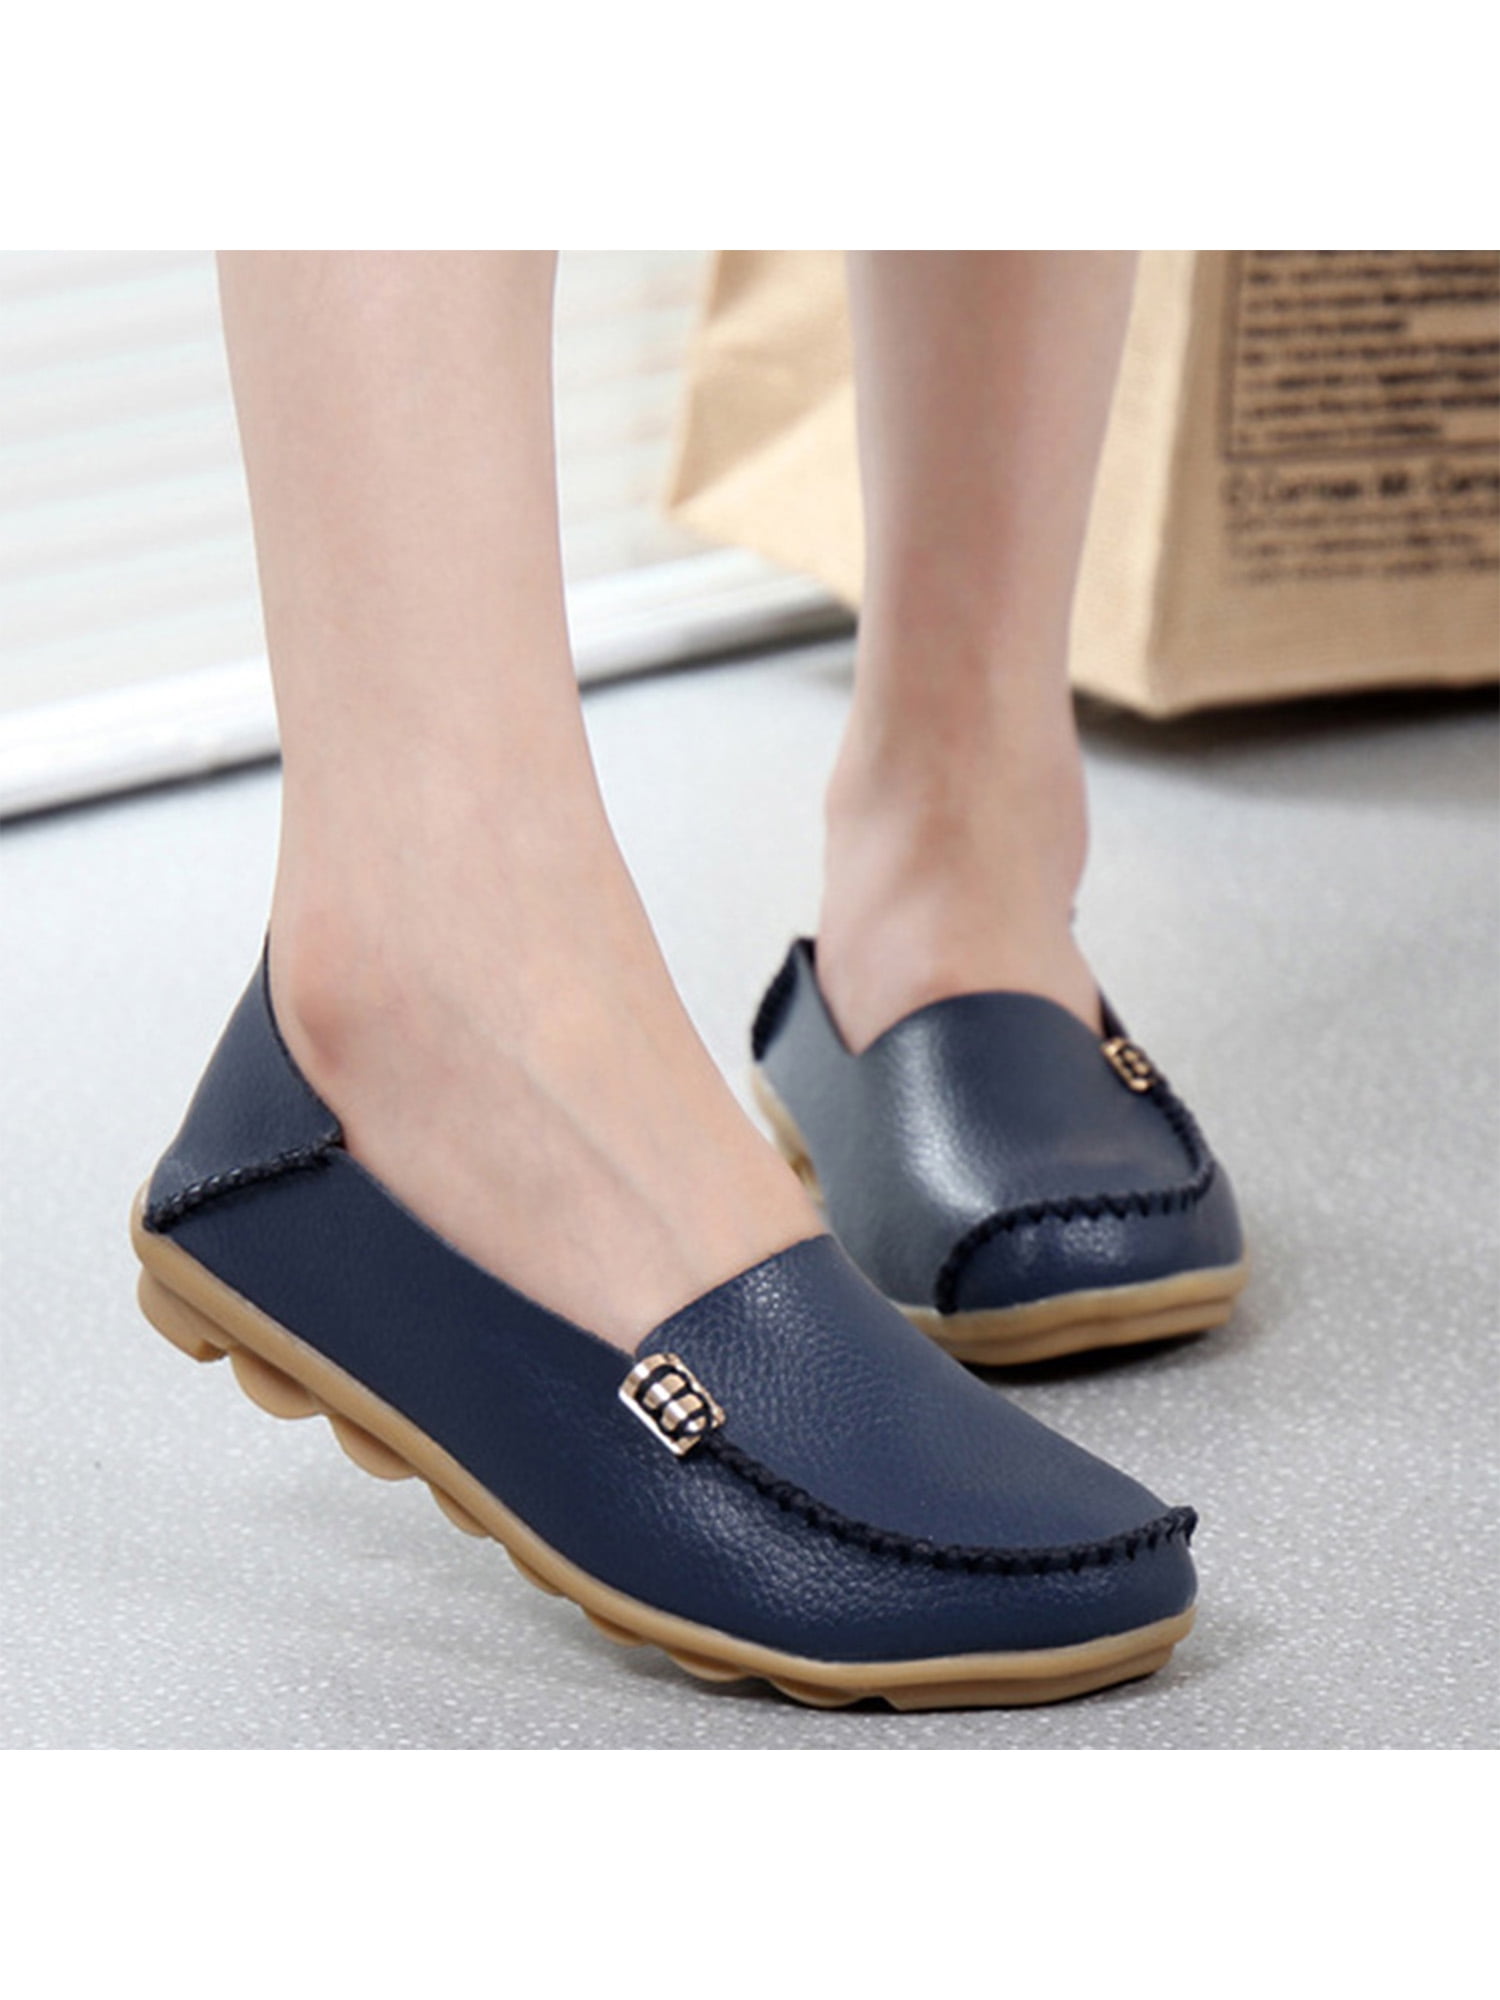 Women Cozy Loafers Soft Premium PU Leather Upper Thick Rubber Sole Simple Design Lightweight Working Driving Flat Penny Shoes 